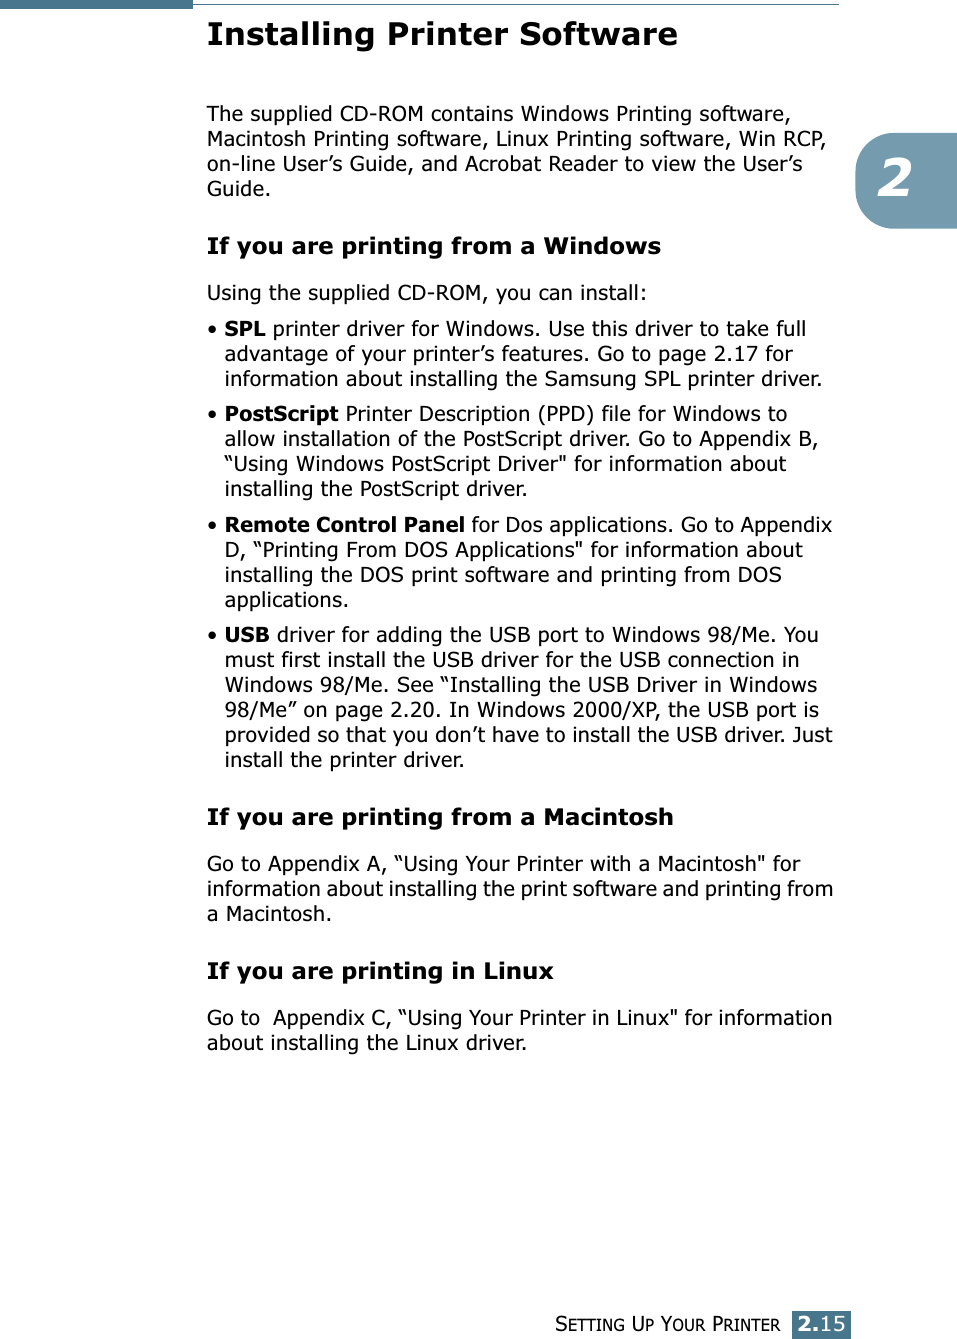 SETTING UP YOUR PRINTER2.152Installing Printer SoftwareThe supplied CD-ROM contains Windows Printing software, Macintosh Printing software, Linux Printing software, Win RCP, on-line User’s Guide, and Acrobat Reader to view the User’s Guide.If you are printing from a WindowsUsing the supplied CD-ROM, you can install:•SPL printer driver for Windows. Use this driver to take full advantage of your printer’s features. Go to page 2.17 for information about installing the Samsung SPL printer driver.•PostScript Printer Description (PPD) file for Windows to allow installation of the PostScript driver. Go to Appendix B, “Using Windows PostScript Driver&quot; for information about installing the PostScript driver. •Remote Control Panel for Dos applications. Go to Appendix D, “Printing From DOS Applications&quot; for information about installing the DOS print software and printing from DOS applications. •USB driver for adding the USB port to Windows 98/Me. You must first install the USB driver for the USB connection in Windows 98/Me. See “Installing the USB Driver in Windows 98/Me” on page 2.20. In Windows 2000/XP, the USB port is provided so that you don’t have to install the USB driver. Just install the printer driver.If you are printing from a MacintoshGo to Appendix A, “Using Your Printer with a Macintosh&quot; for information about installing the print software and printing from a Macintosh.If you are printing in LinuxGo to  Appendix C, “Using Your Printer in Linux&quot; for information about installing the Linux driver.